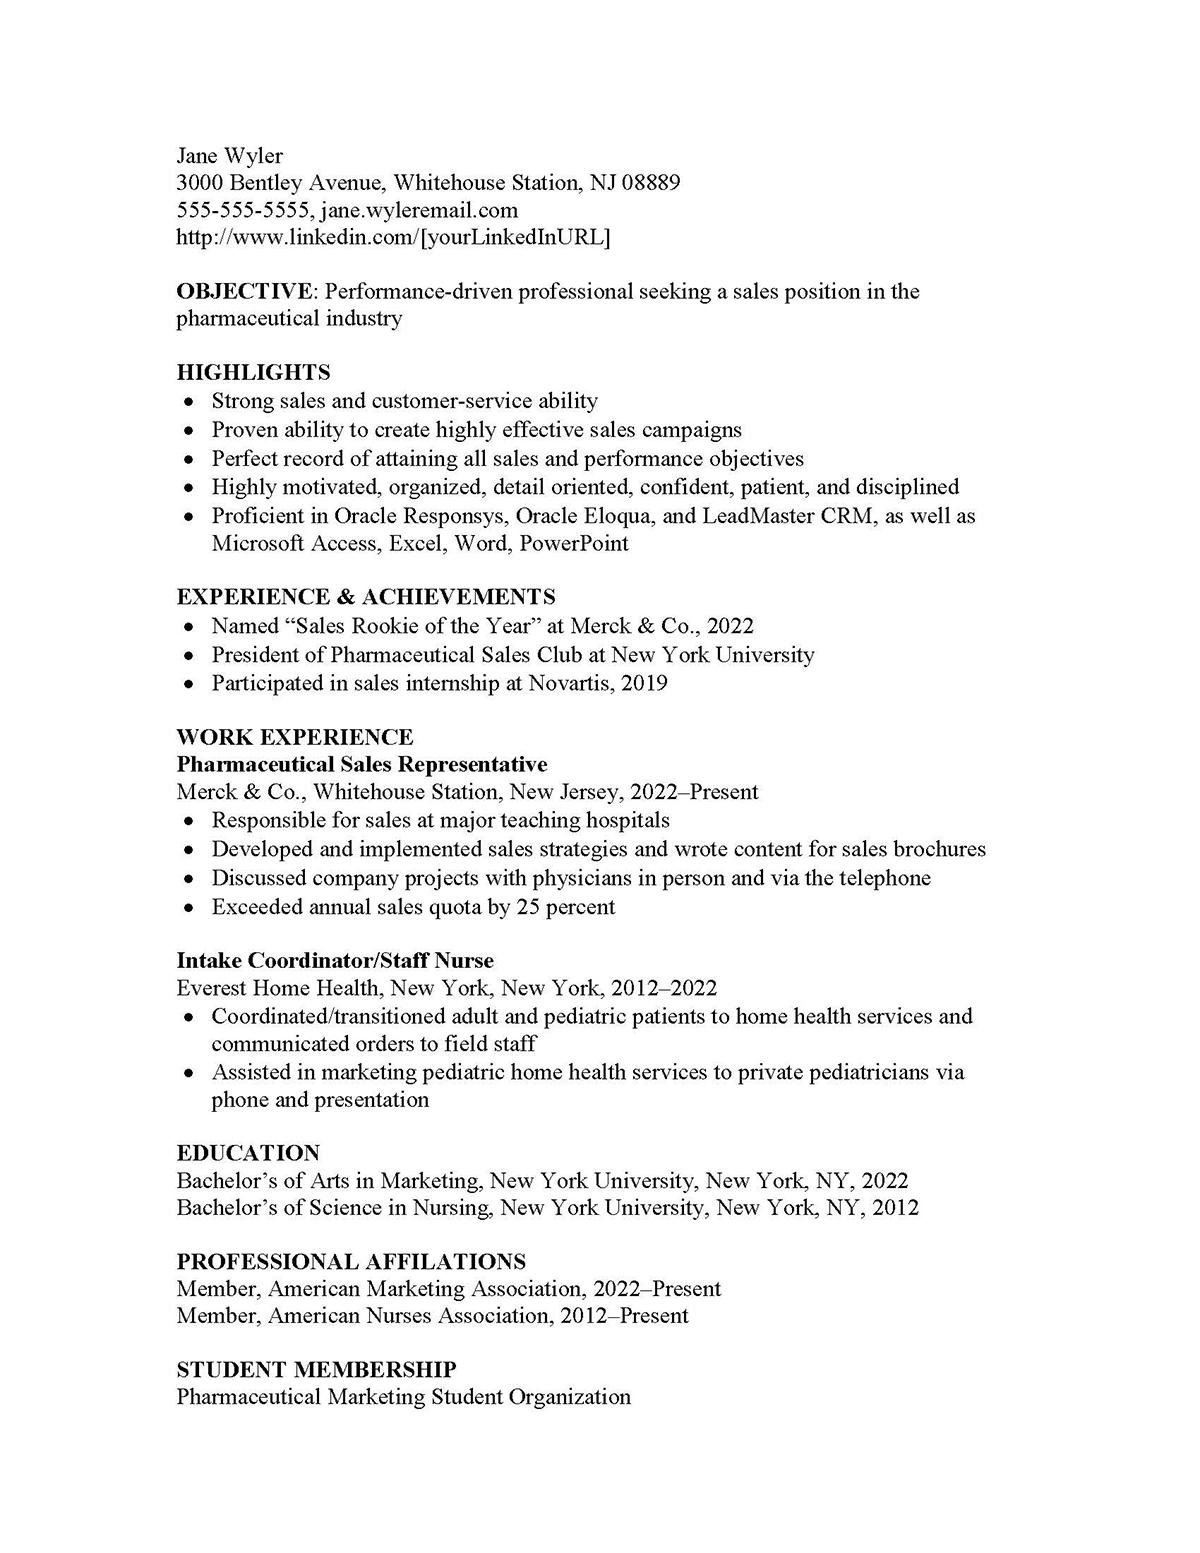 Sample resume: Pharmaceuticals, Mid Experience, Combination